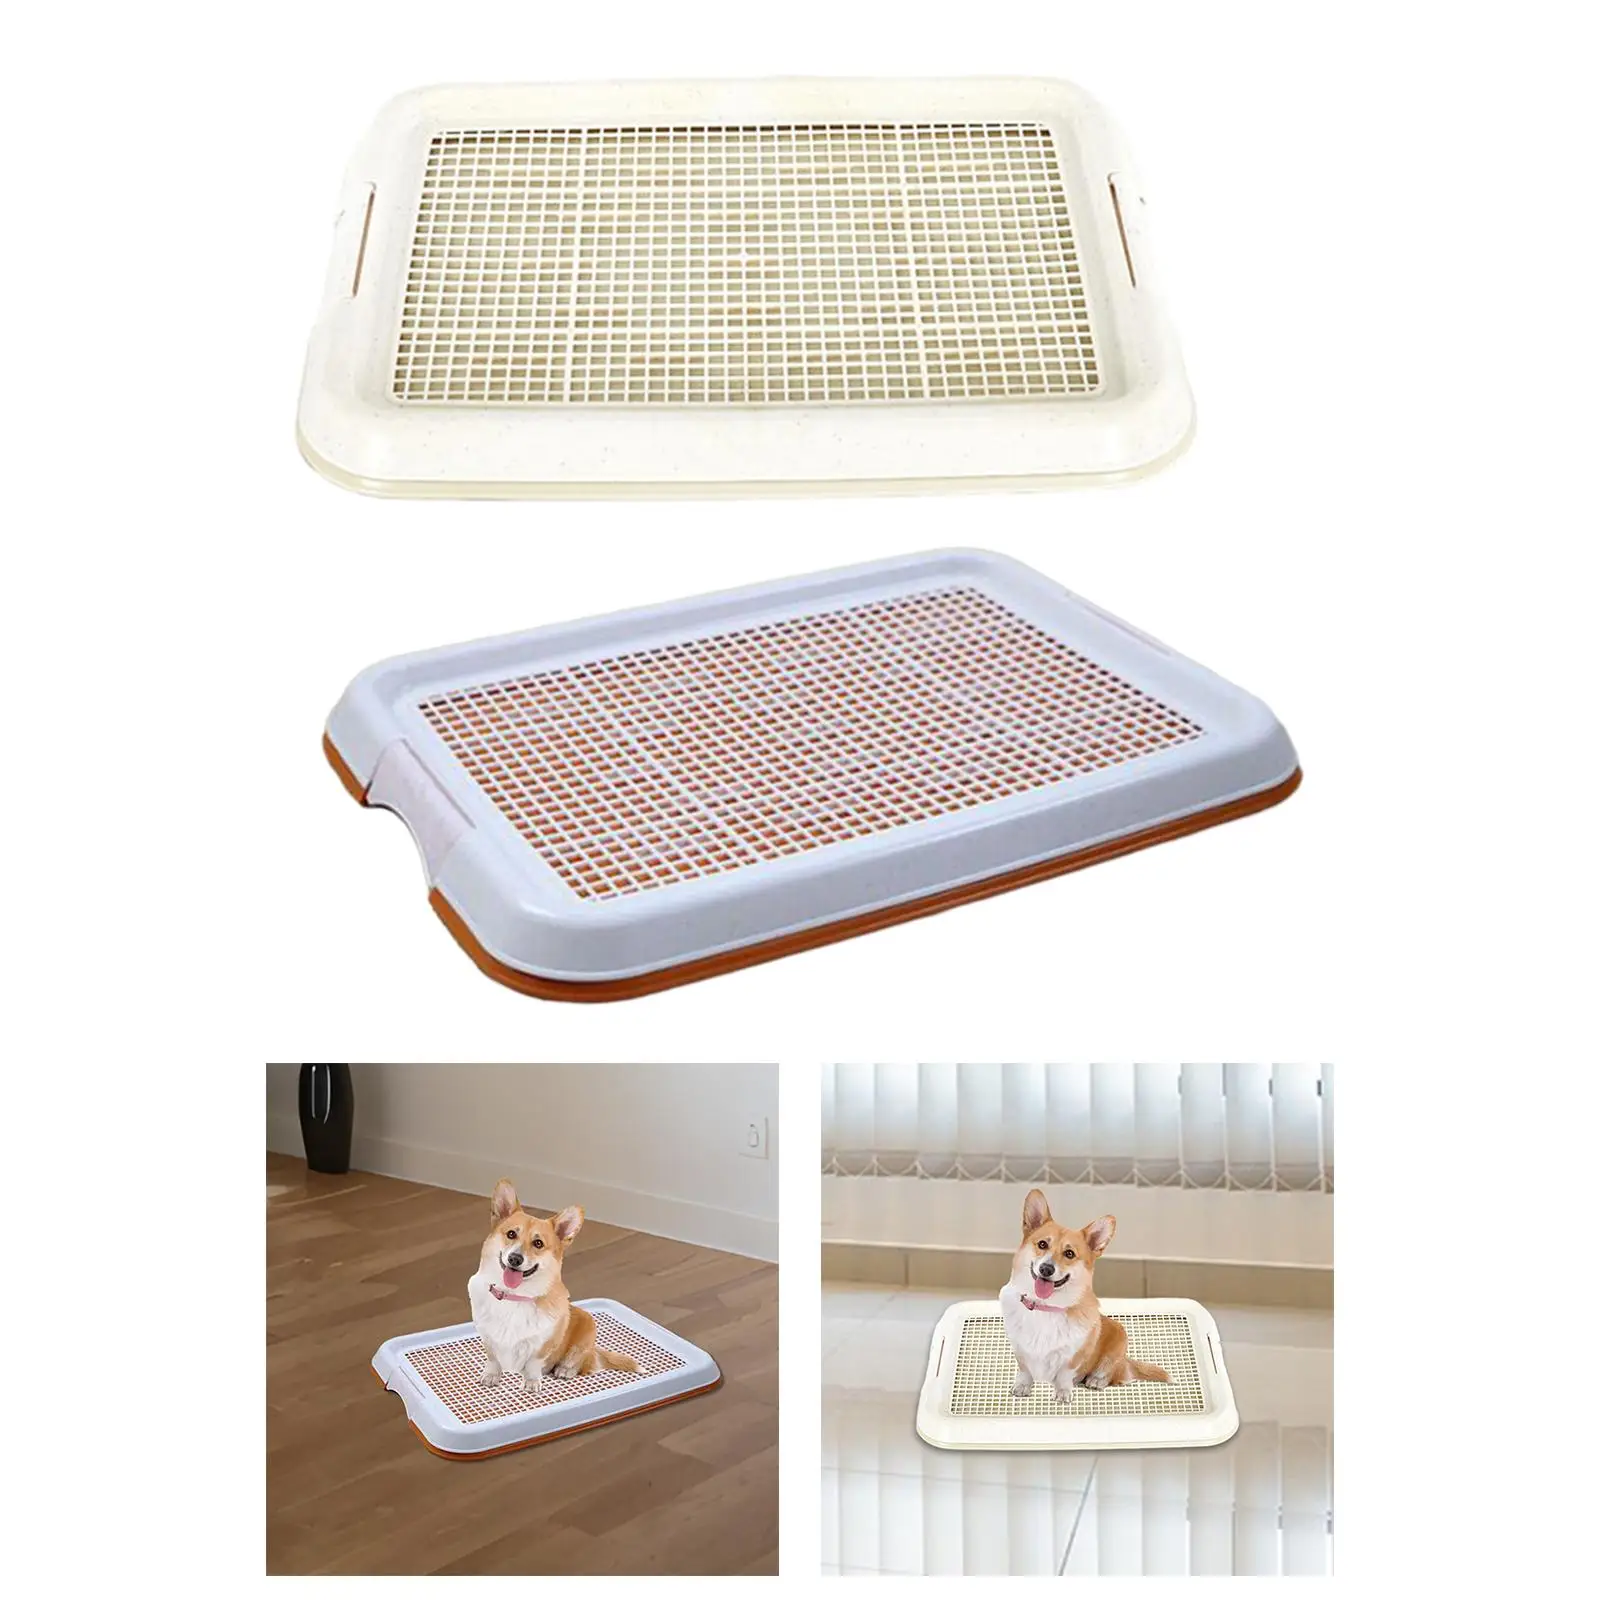 Dog Potty Toilet Removable Mesh Potty Tray for Small Size Dogs